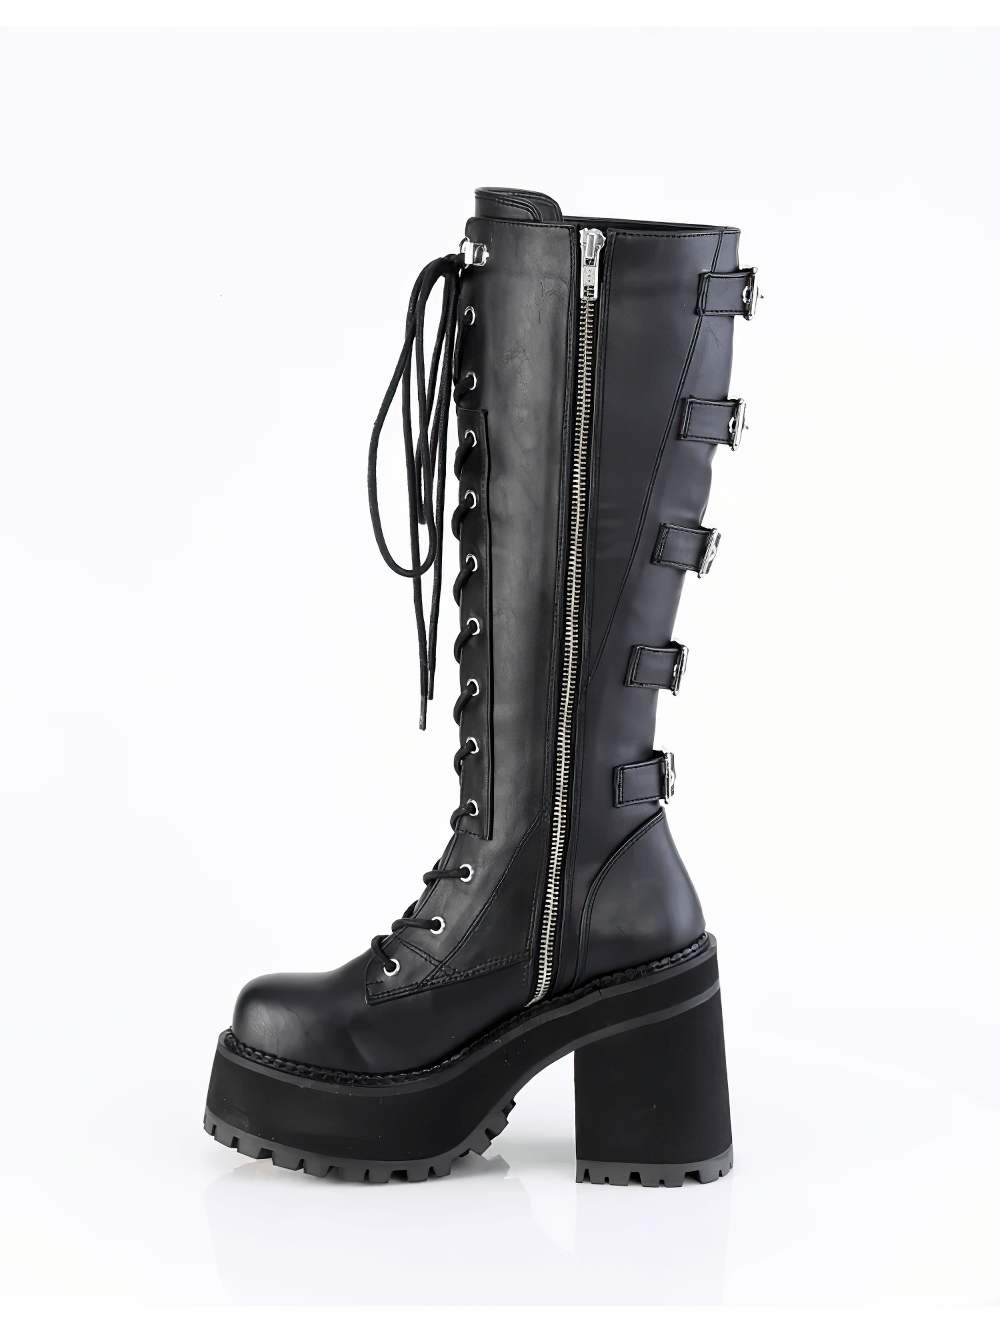 DEMONIA Block Heel Knee High Boots with Spiked Straps